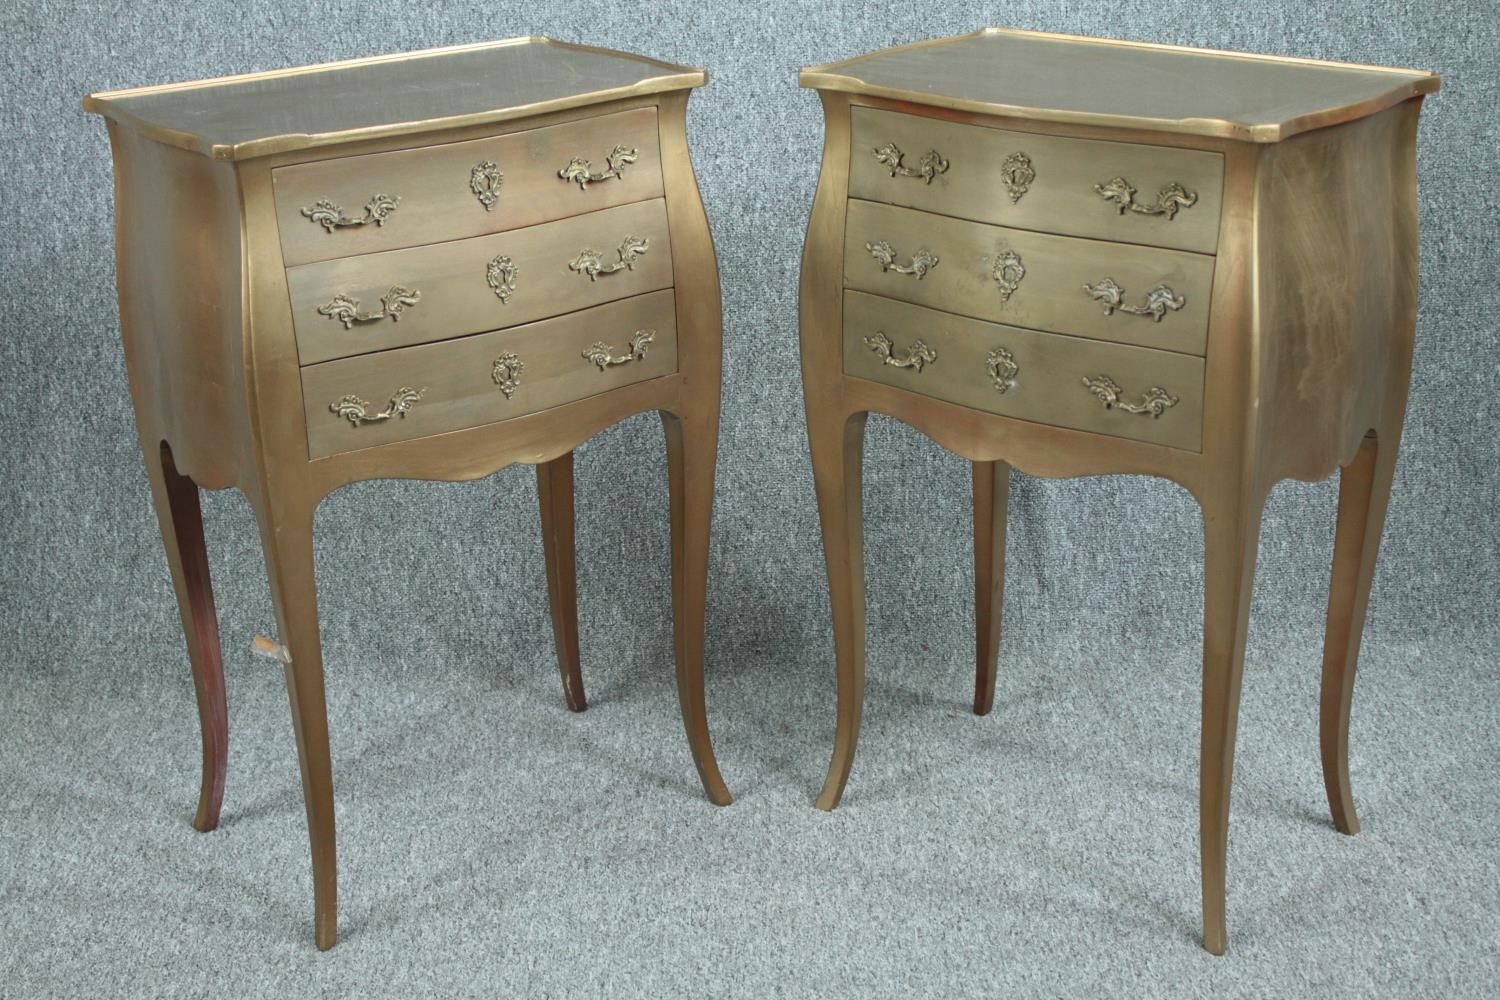 Bedside chests, a pair, Louis XV style gold lacquered. H.74 W.49 D.34cm. (each) - Image 2 of 5